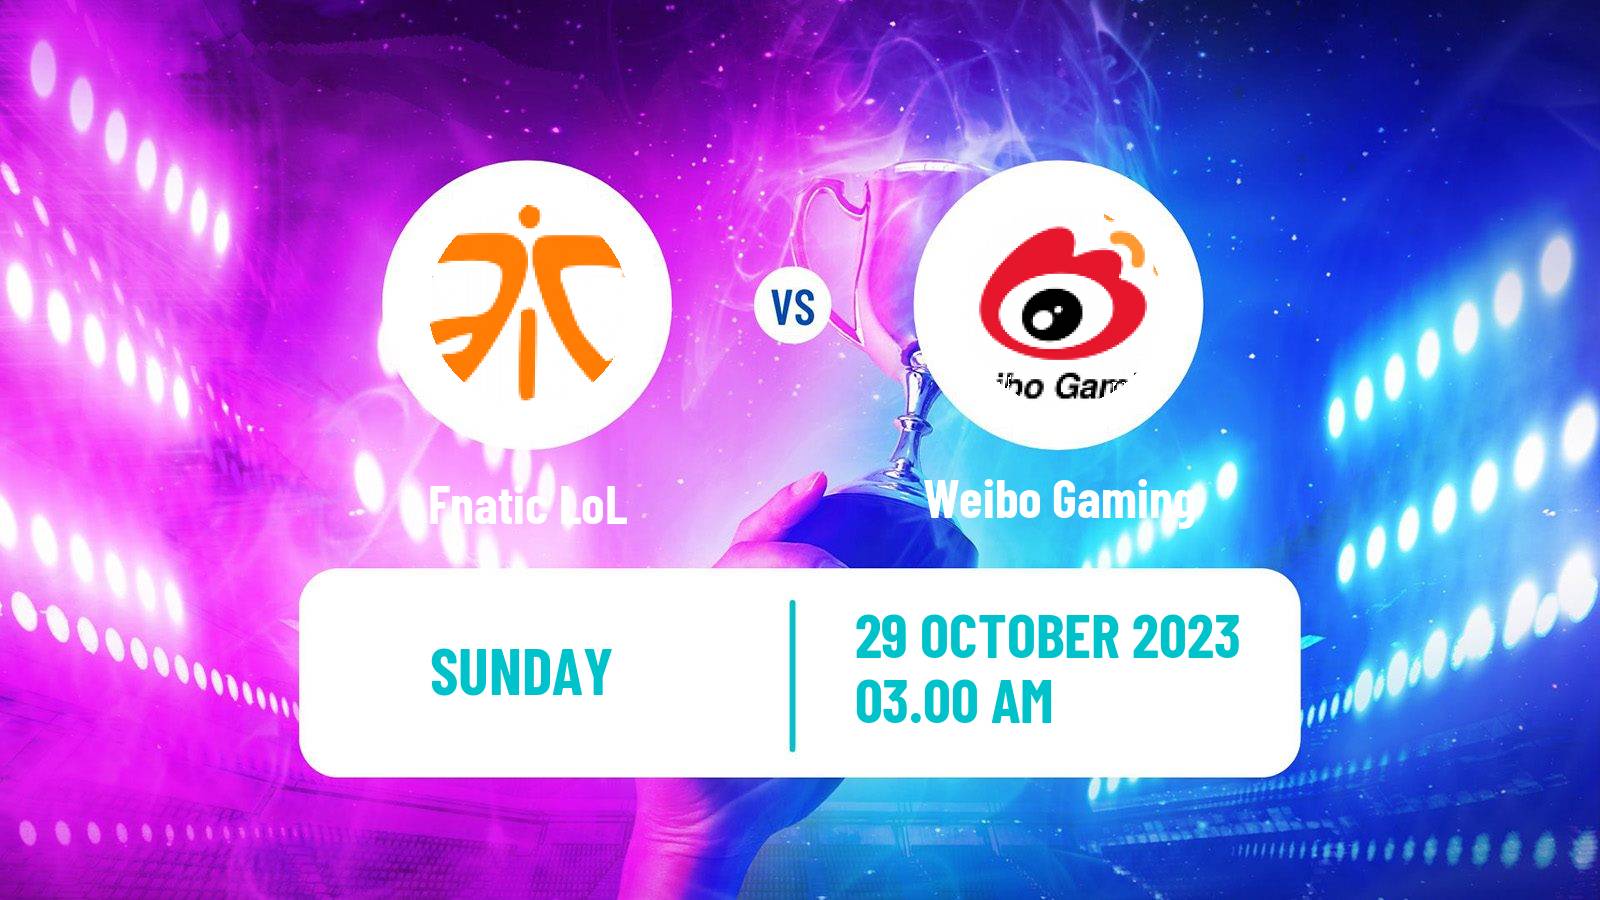 Esports League Of Legends World Championship Fnatic - Weibo Gaming